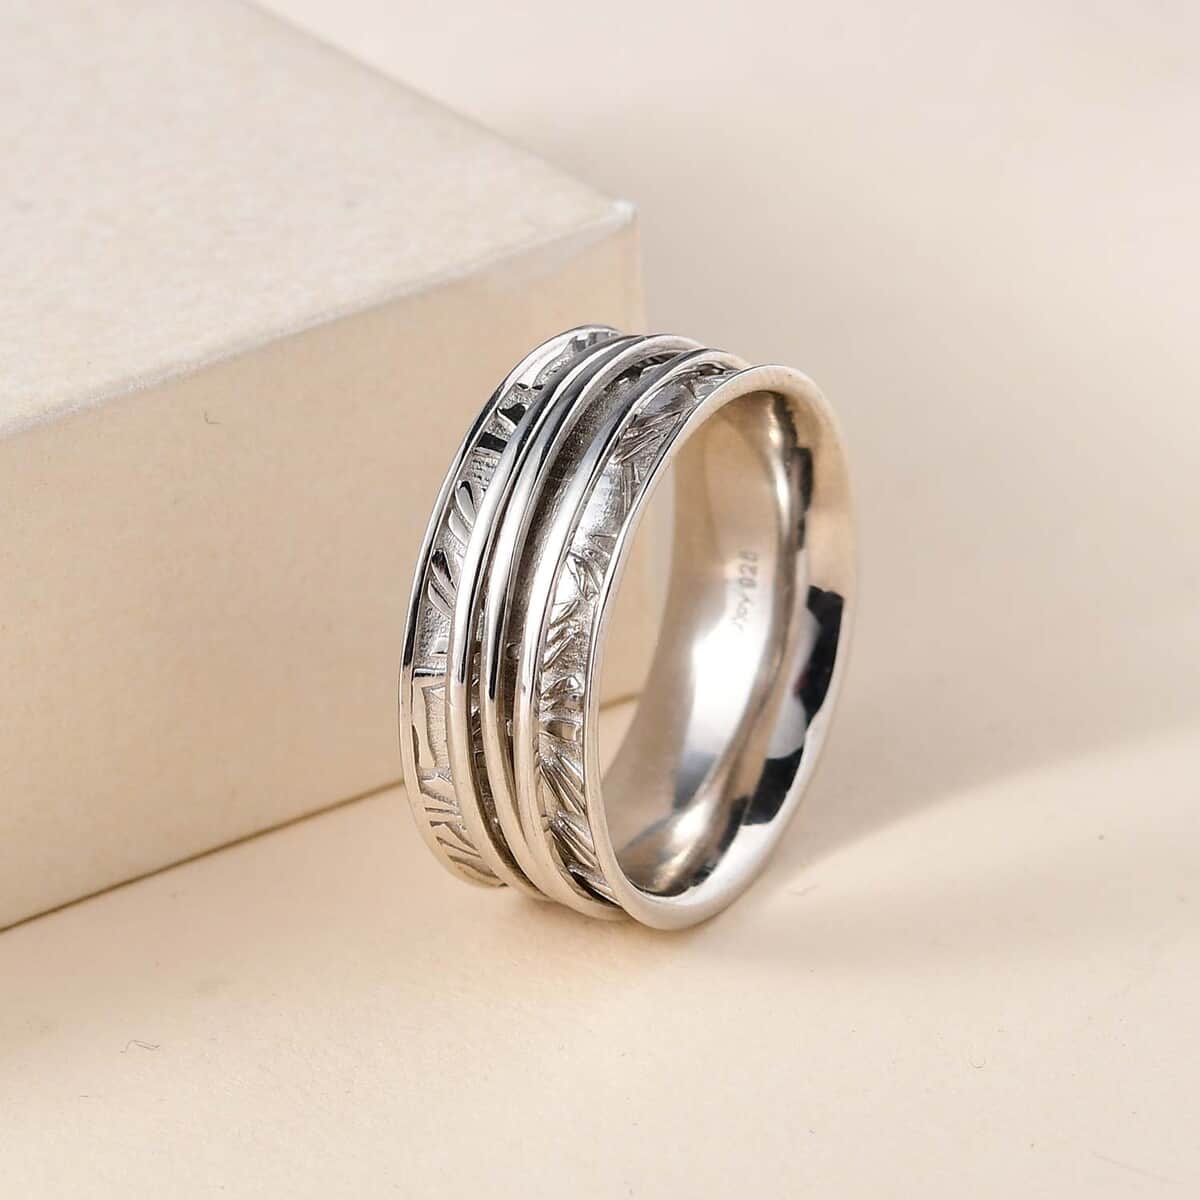 Spinner Ring in Sterling Silver, Anxiety Ring for Women, Fidget Rings for Anxiety for Women, Stress Relieving Anxiety Ring (Size 7.0) (5.85 g) image number 4